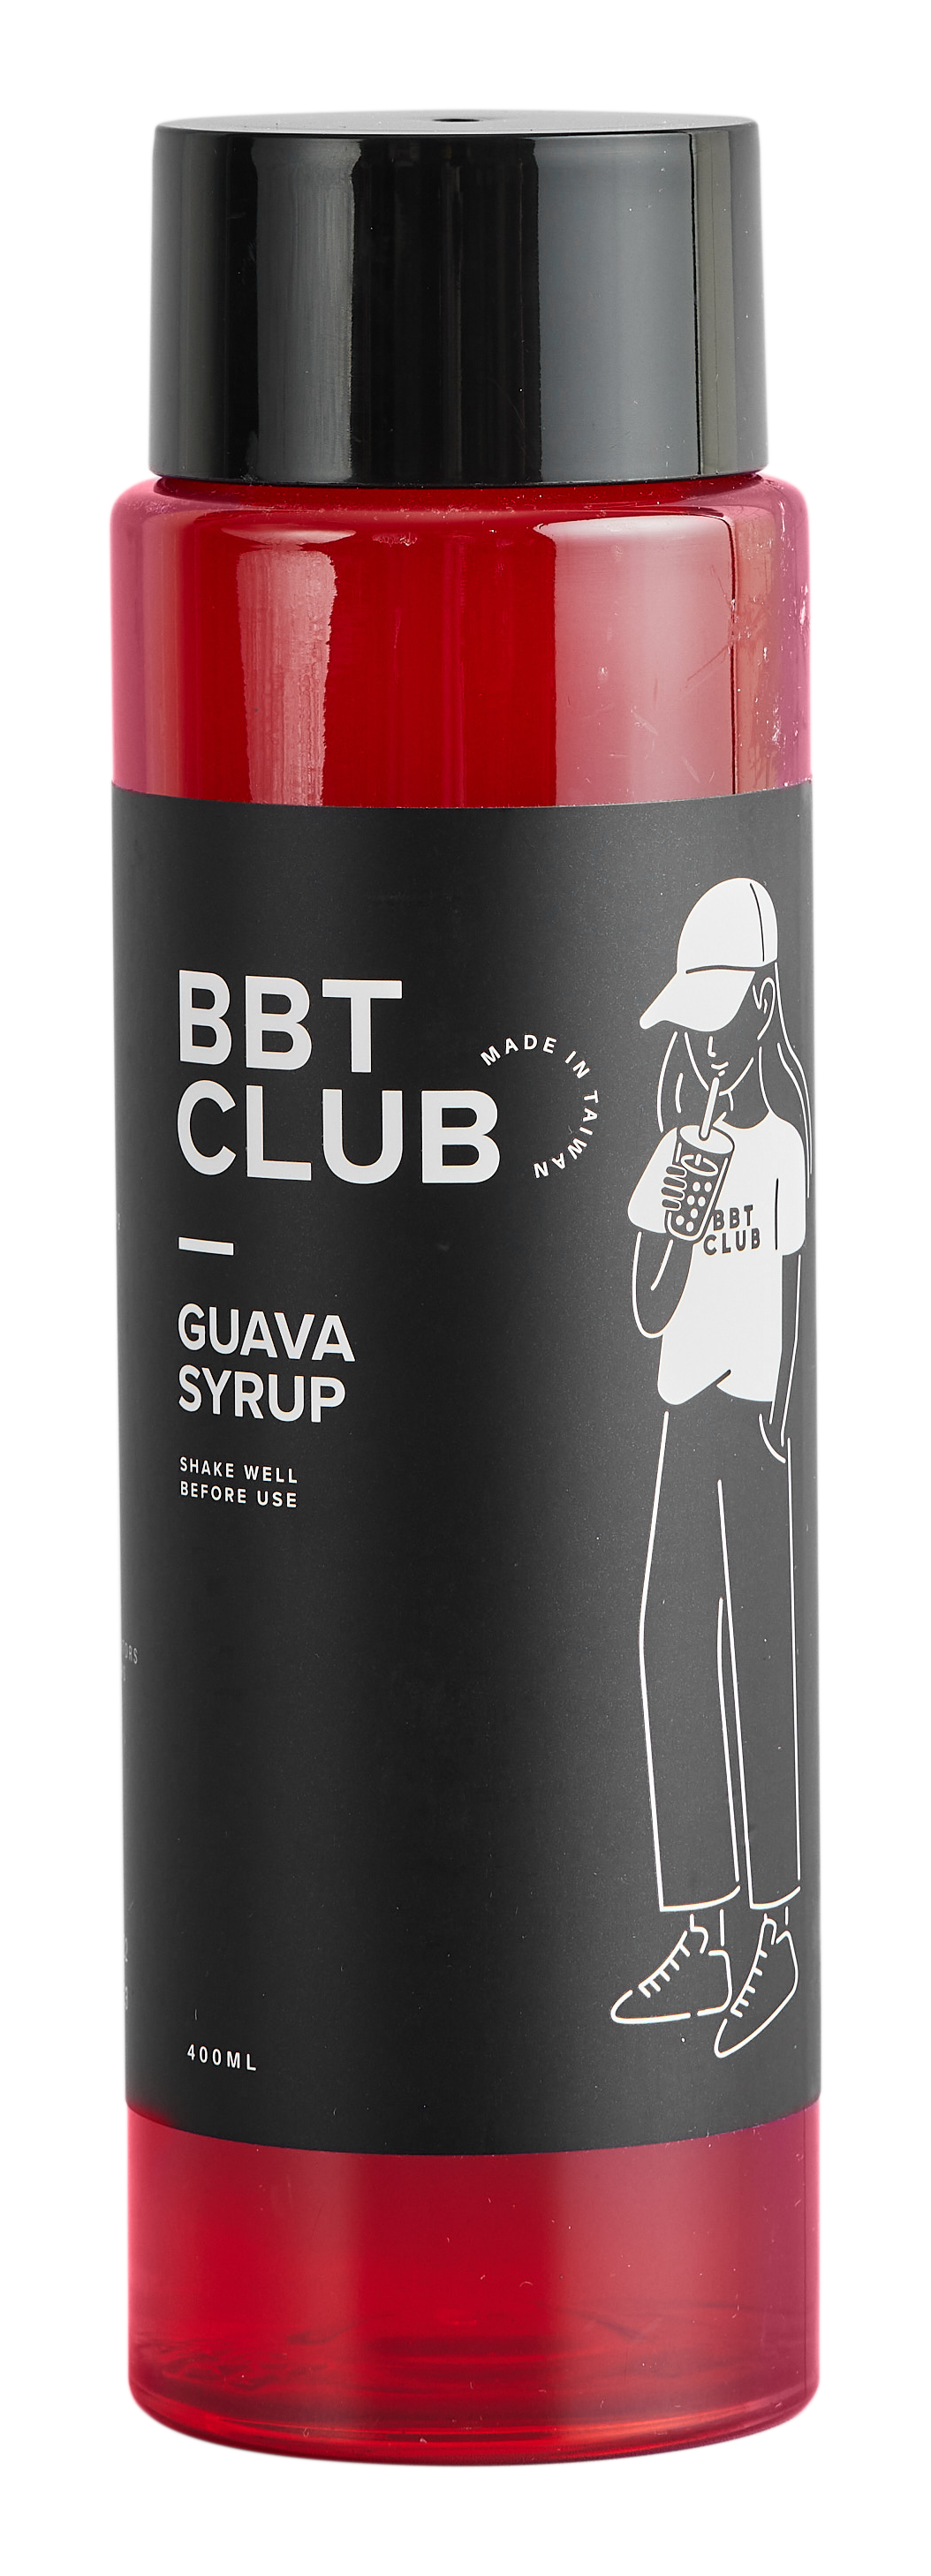 Guava Syrup 400ml